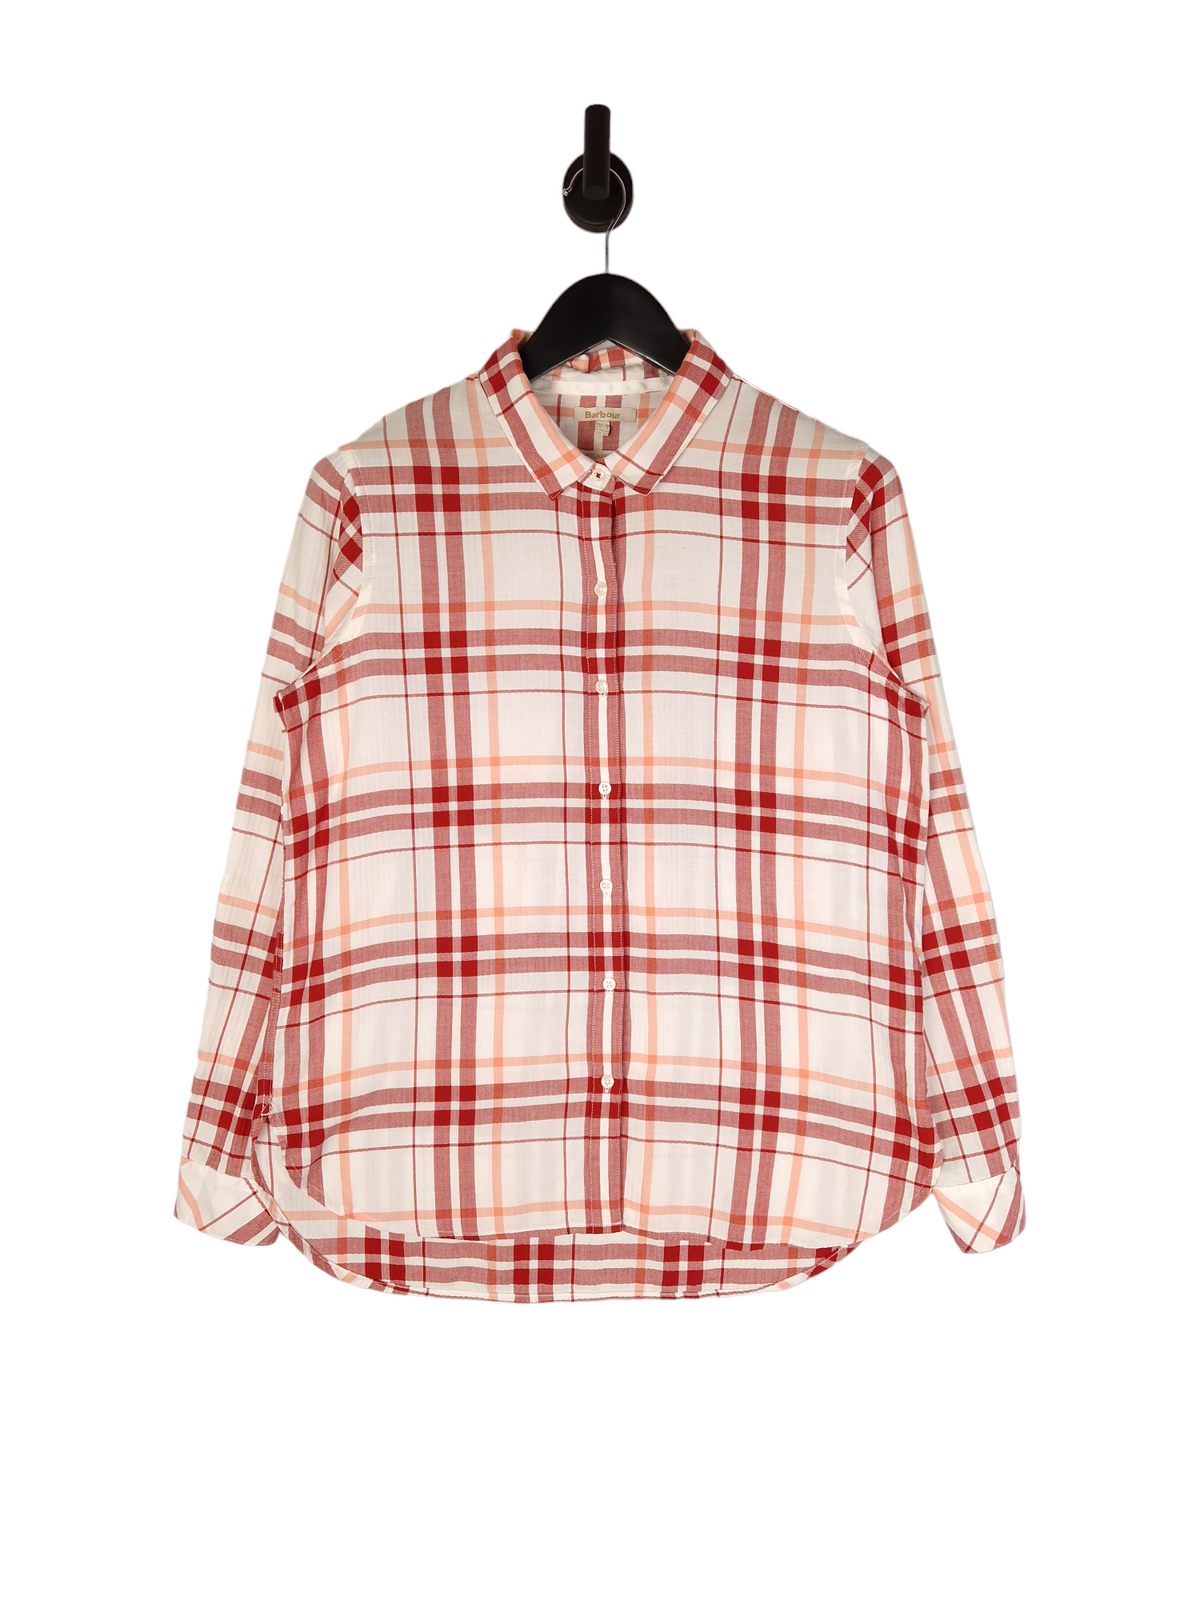 Barbour Shoreline Shirt - Size UK 12 Relaxed Fit